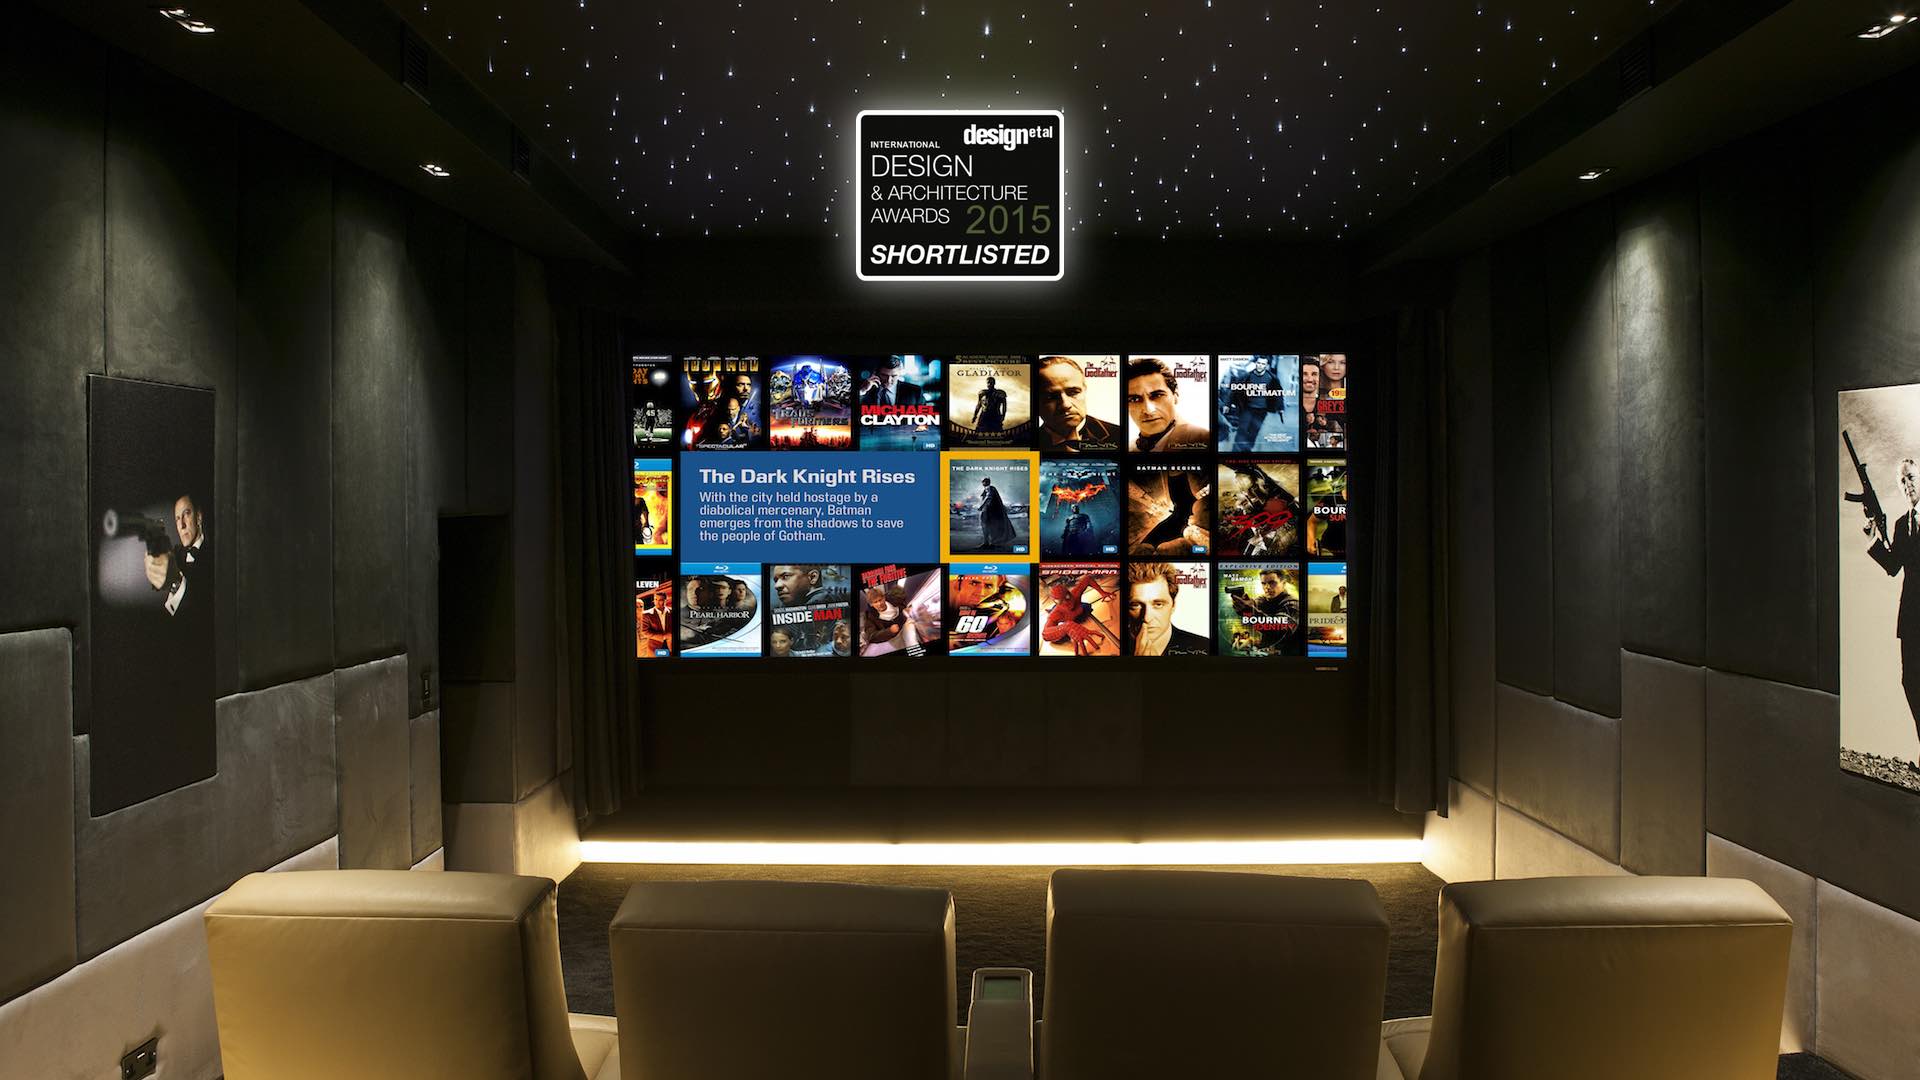 20 Home Theater Design Ideas Perfect for Movie Night